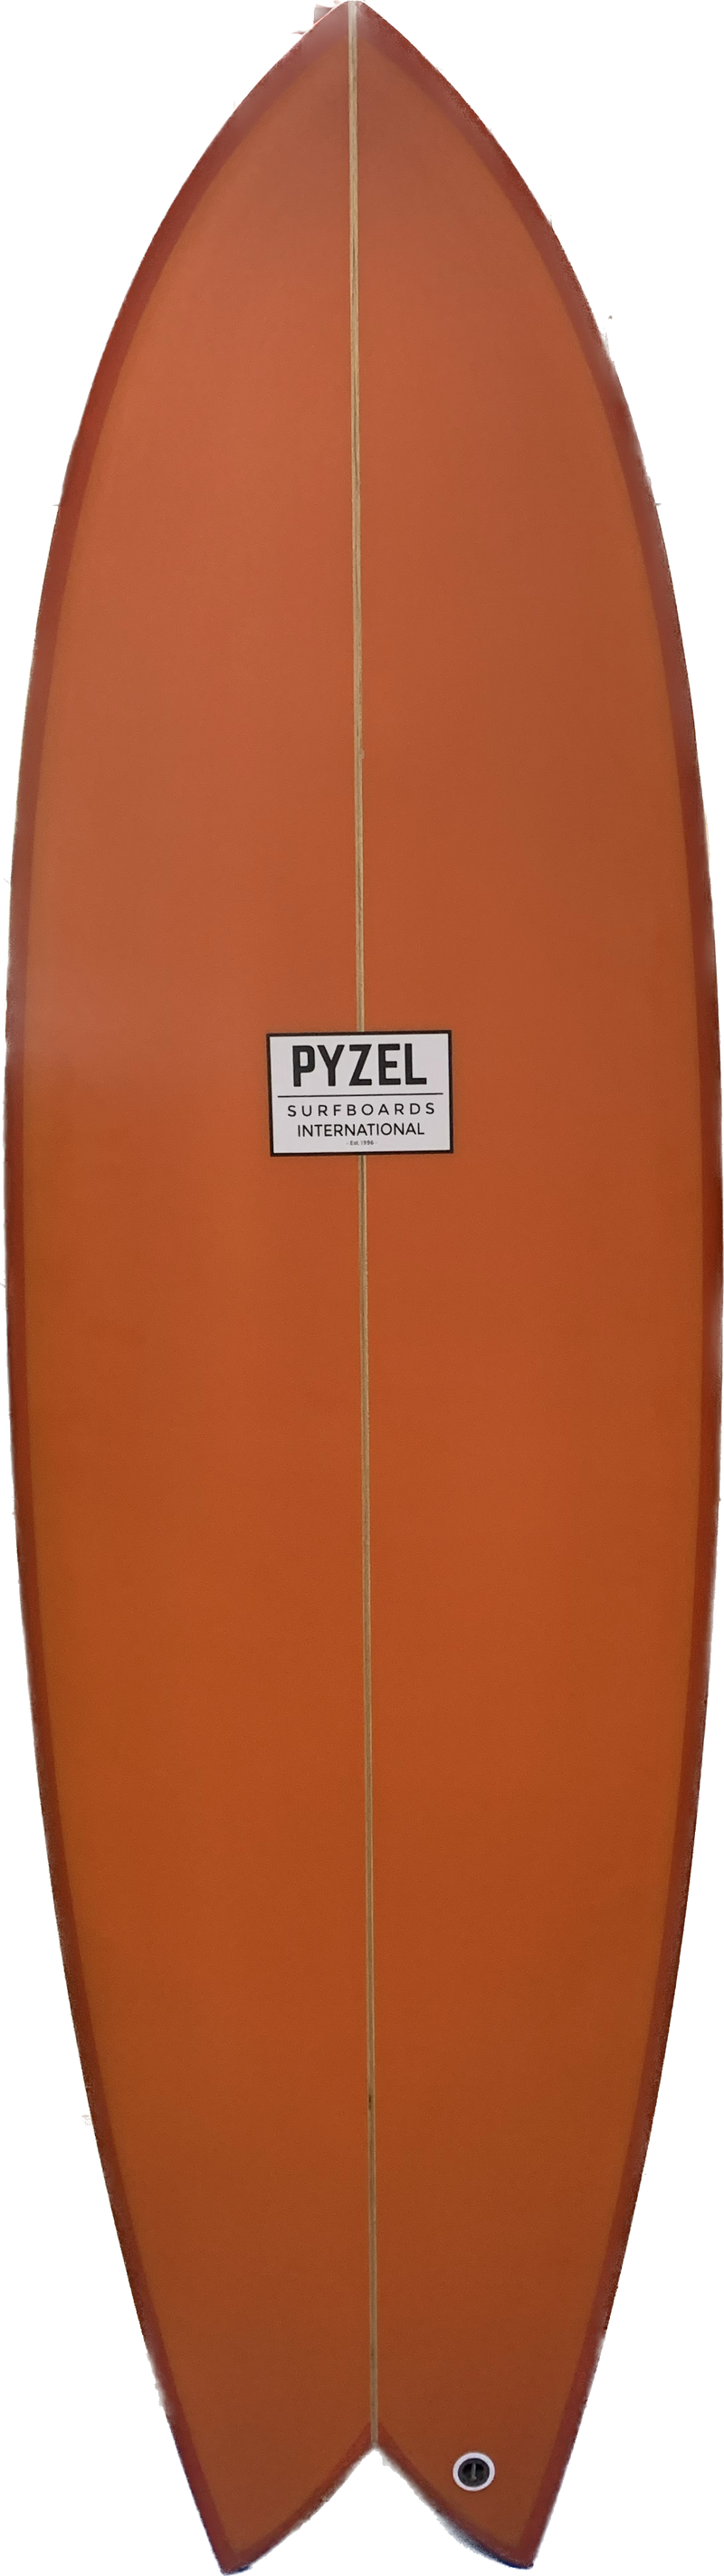 Pyzel Surfboard Astro Glider 6'1 Twin Red